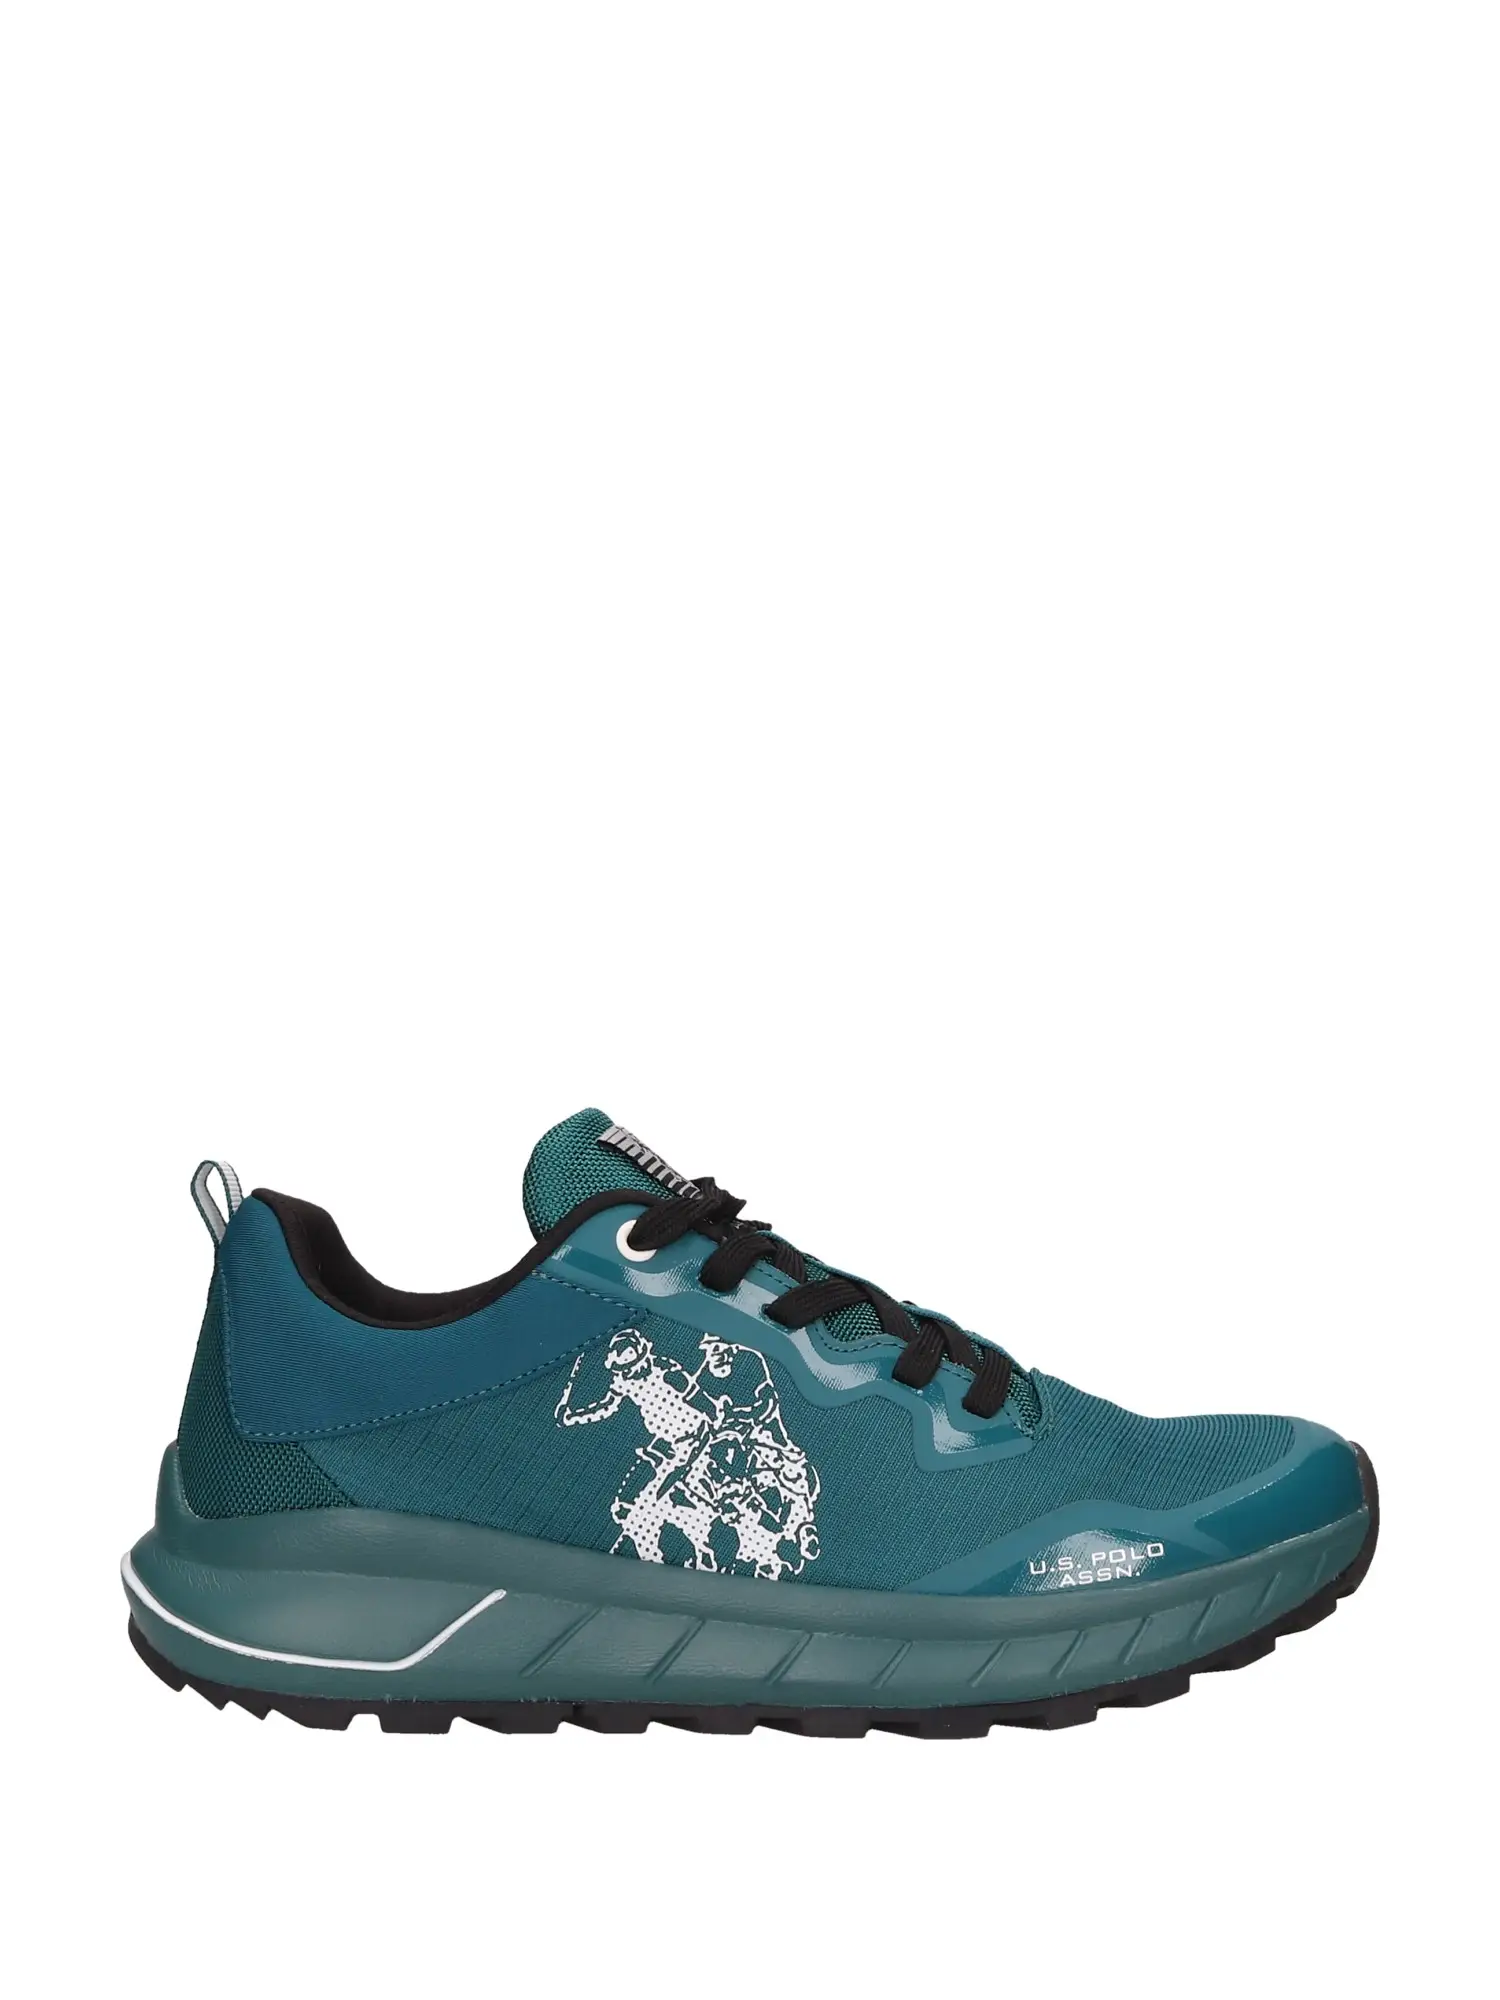 SNEAKERS DONNA - US POLO ASSN. - SETH005M - VERDE, 43